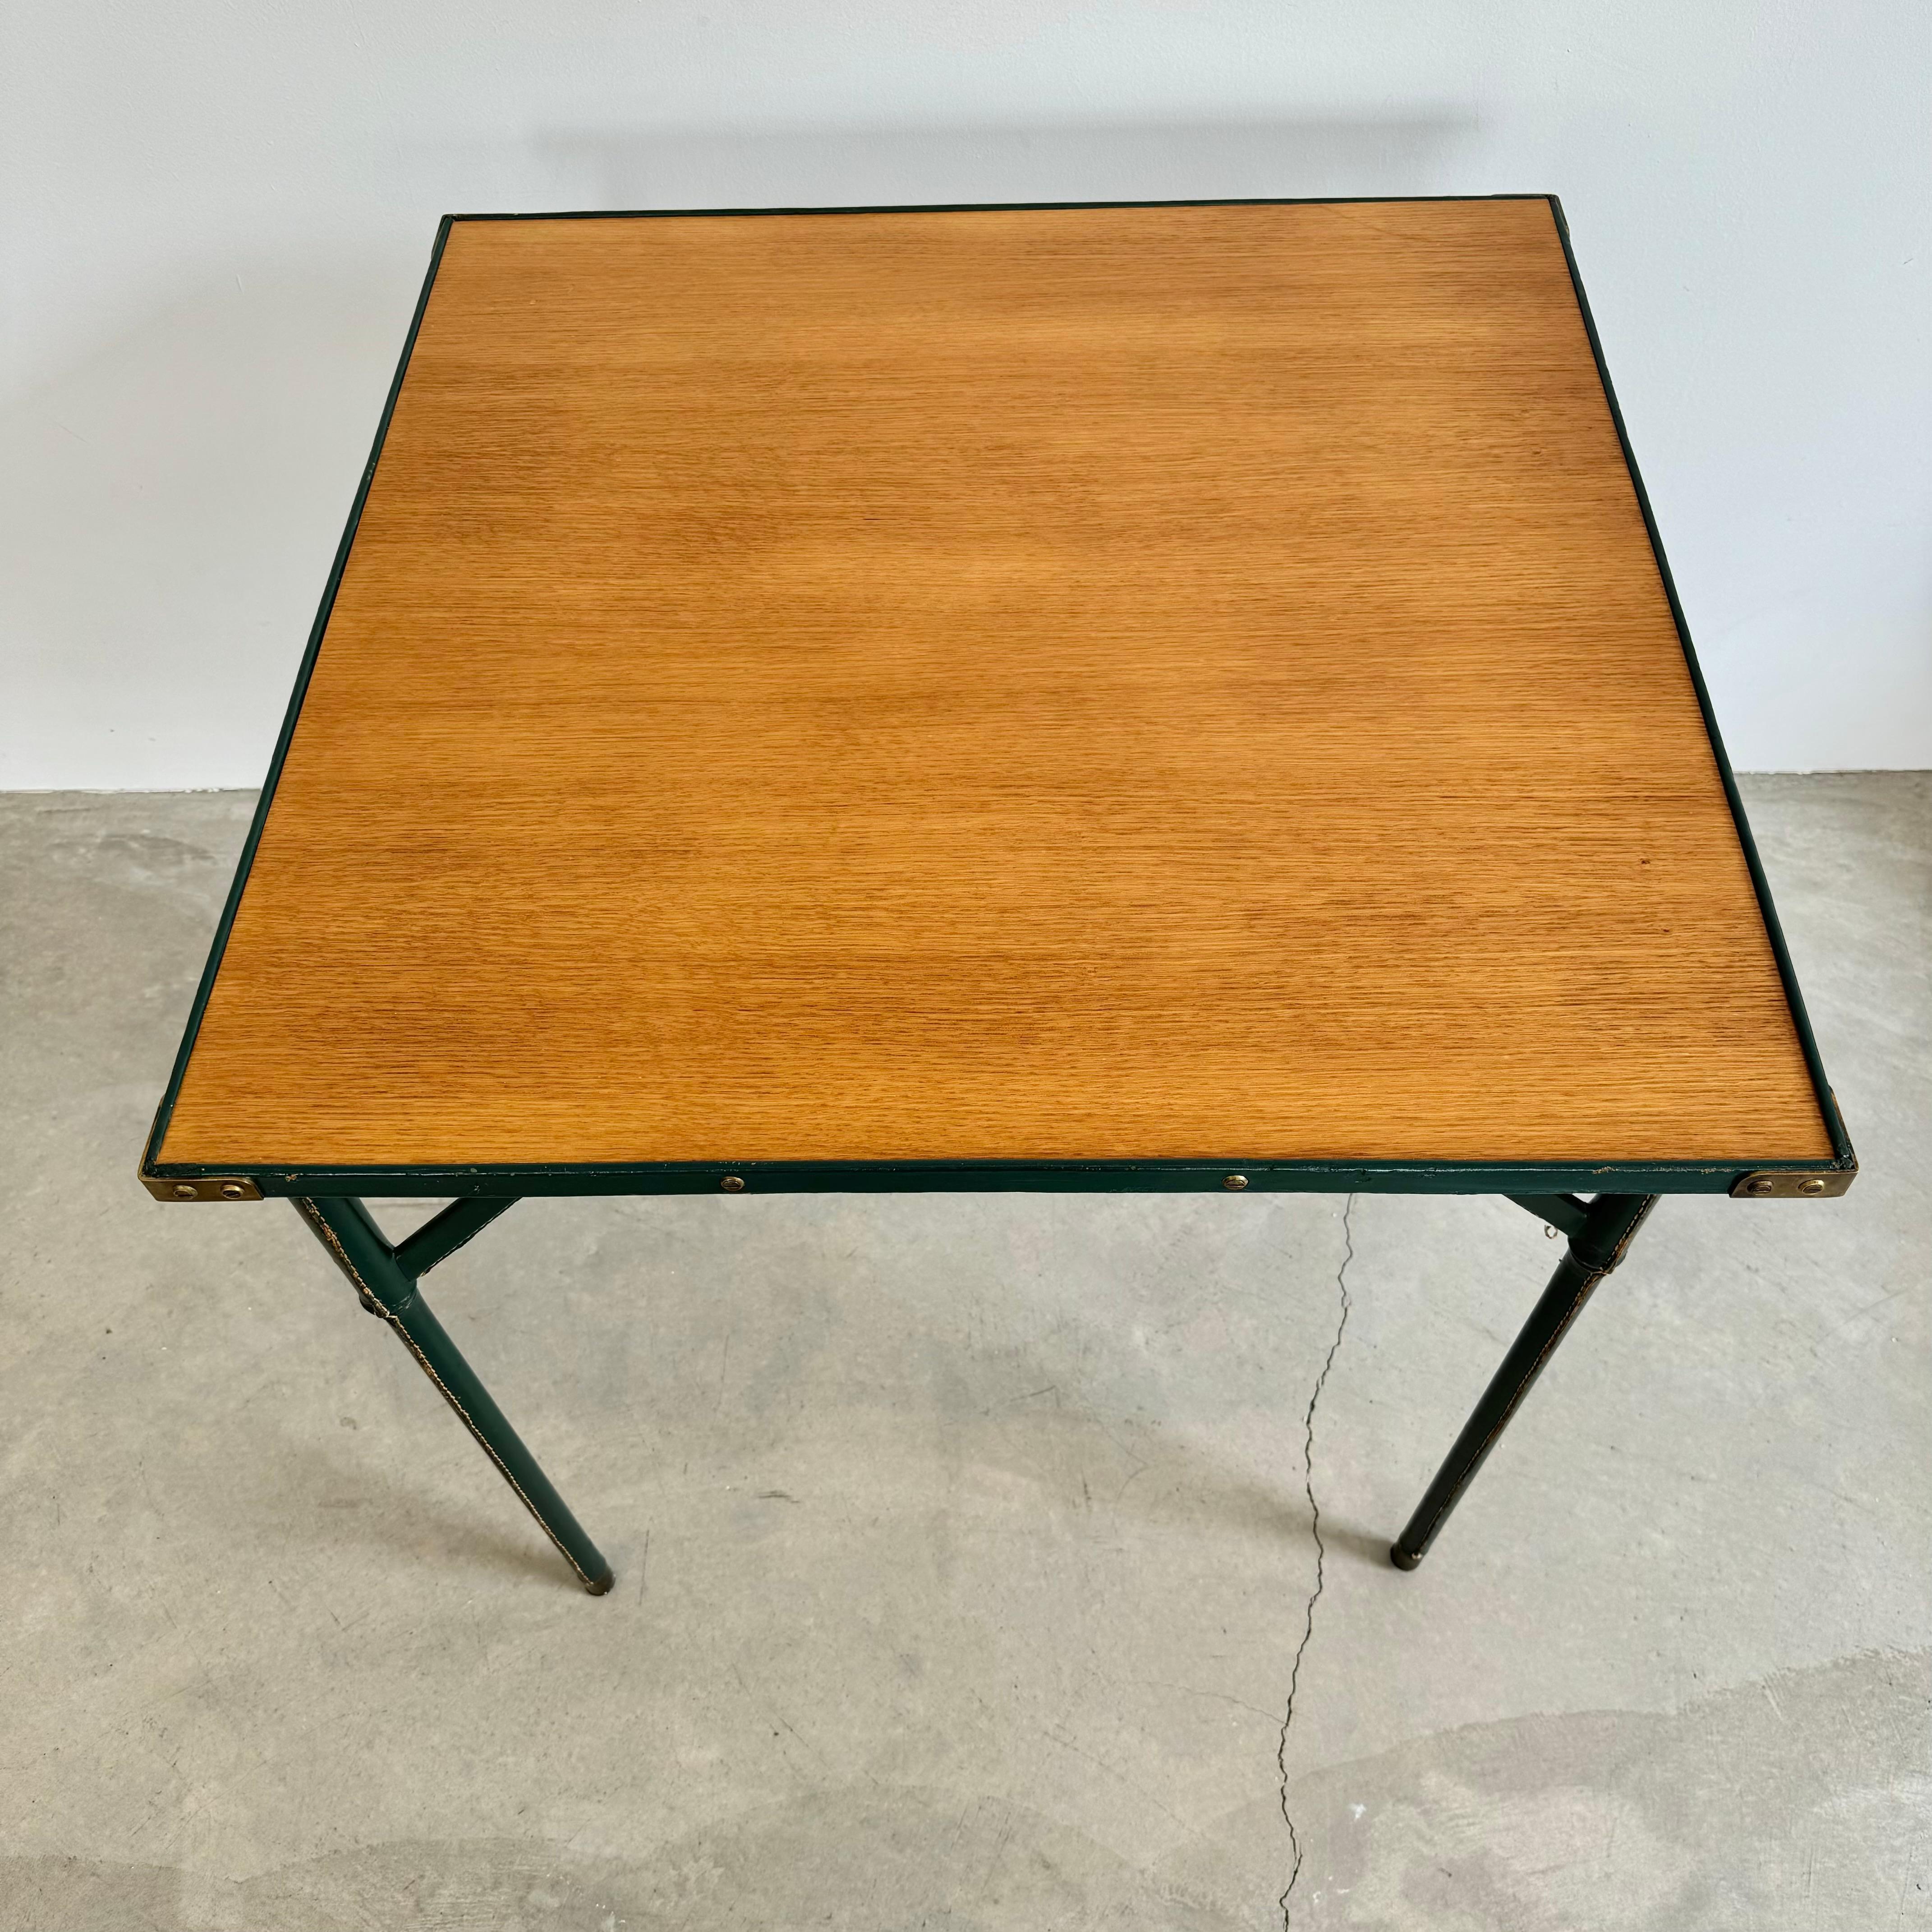 Jacques Adnet Green Leather and Wood Game Table, 1950s France For Sale 10